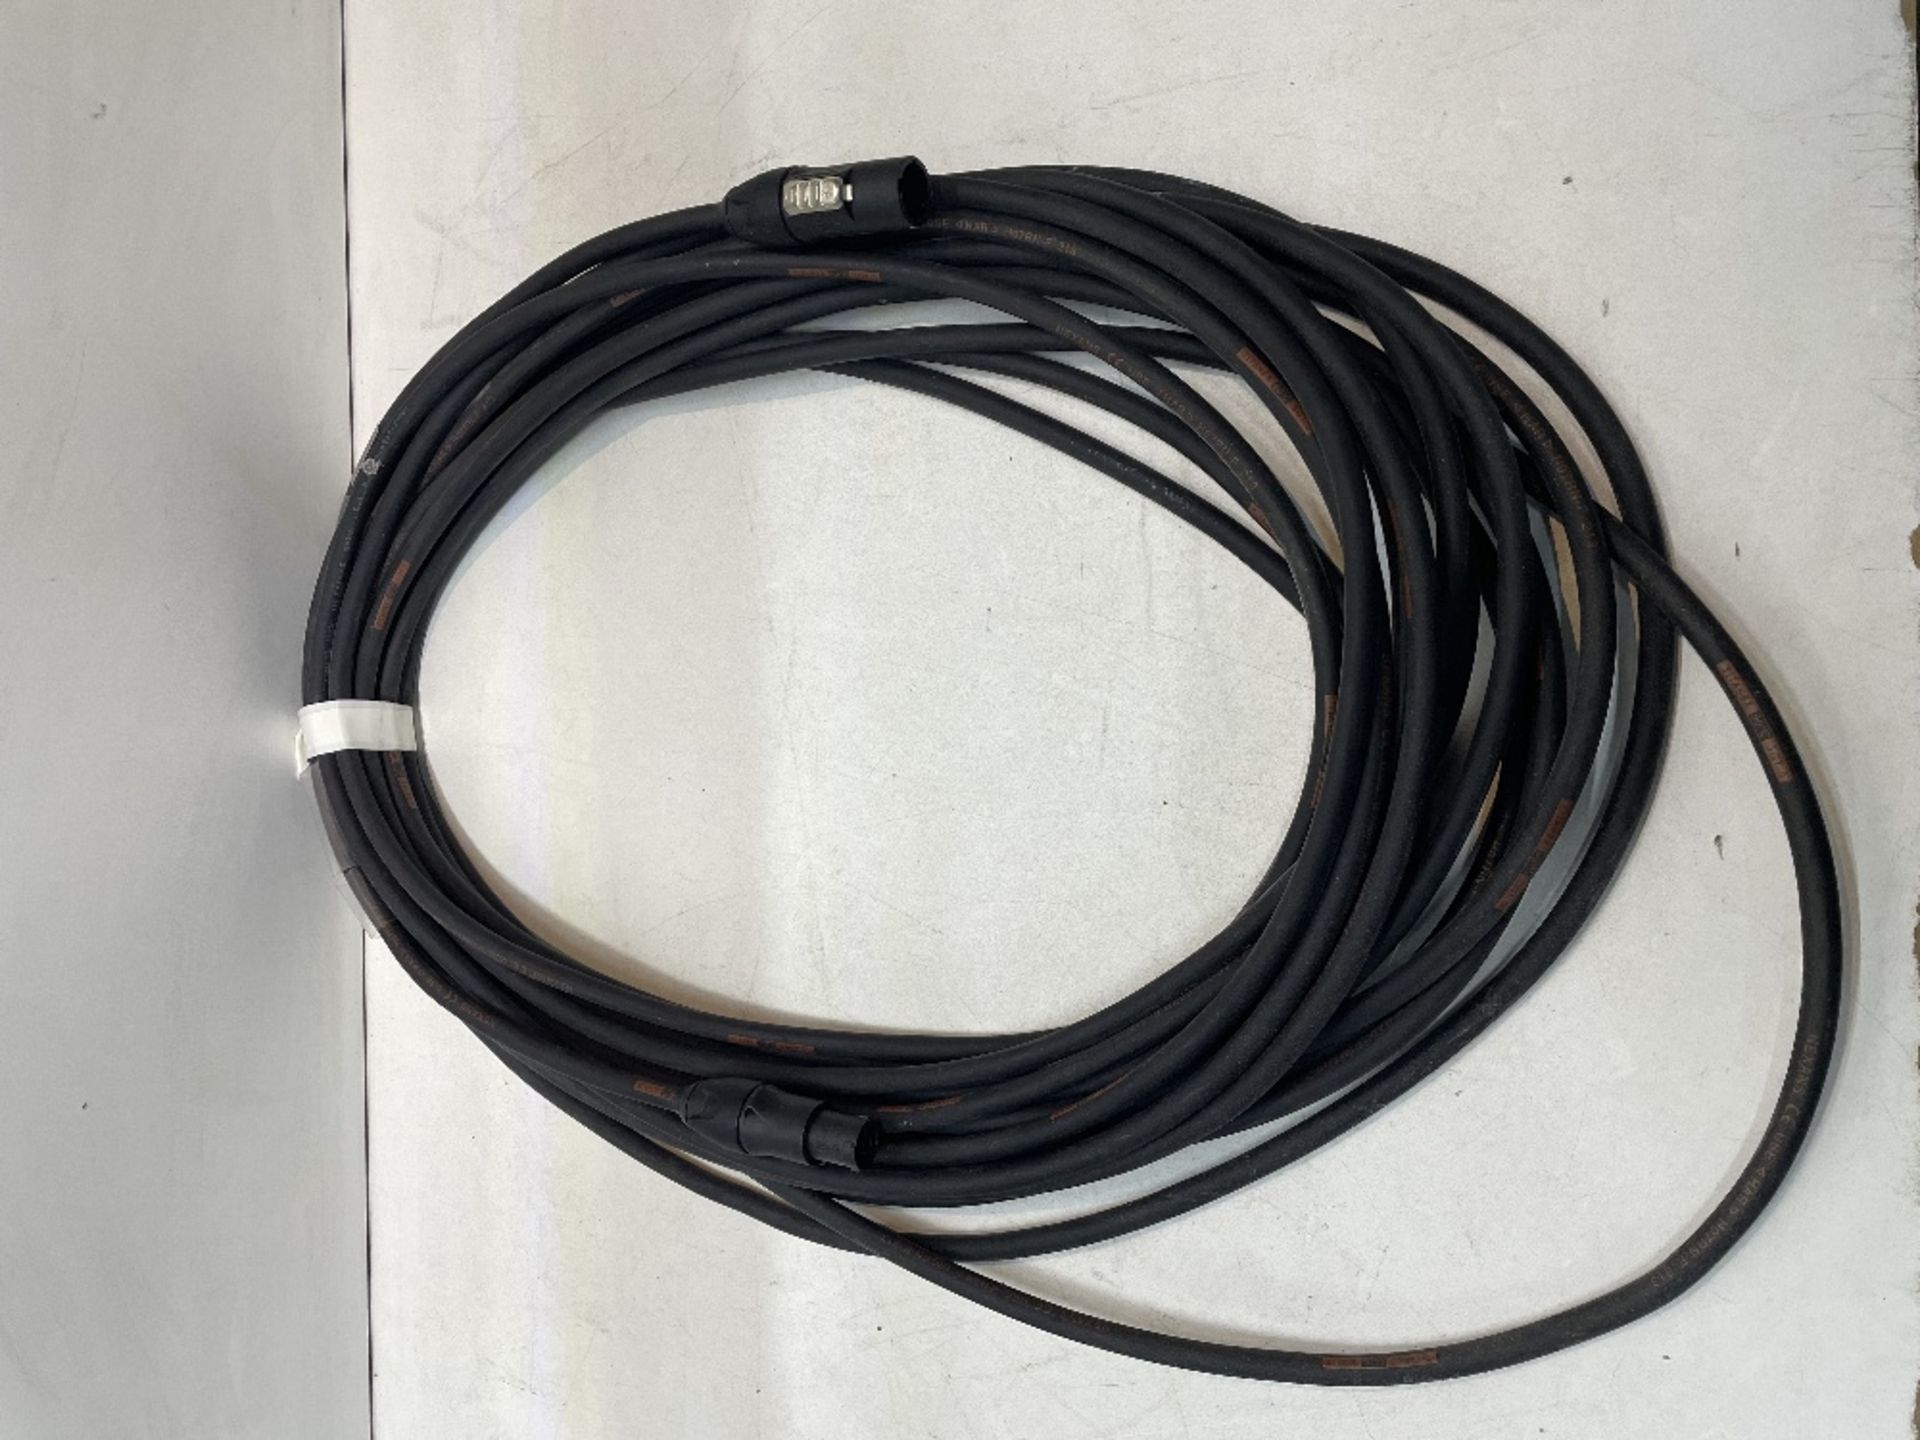 5 x Approx 20m PowerCon True Cables - Image 2 of 6